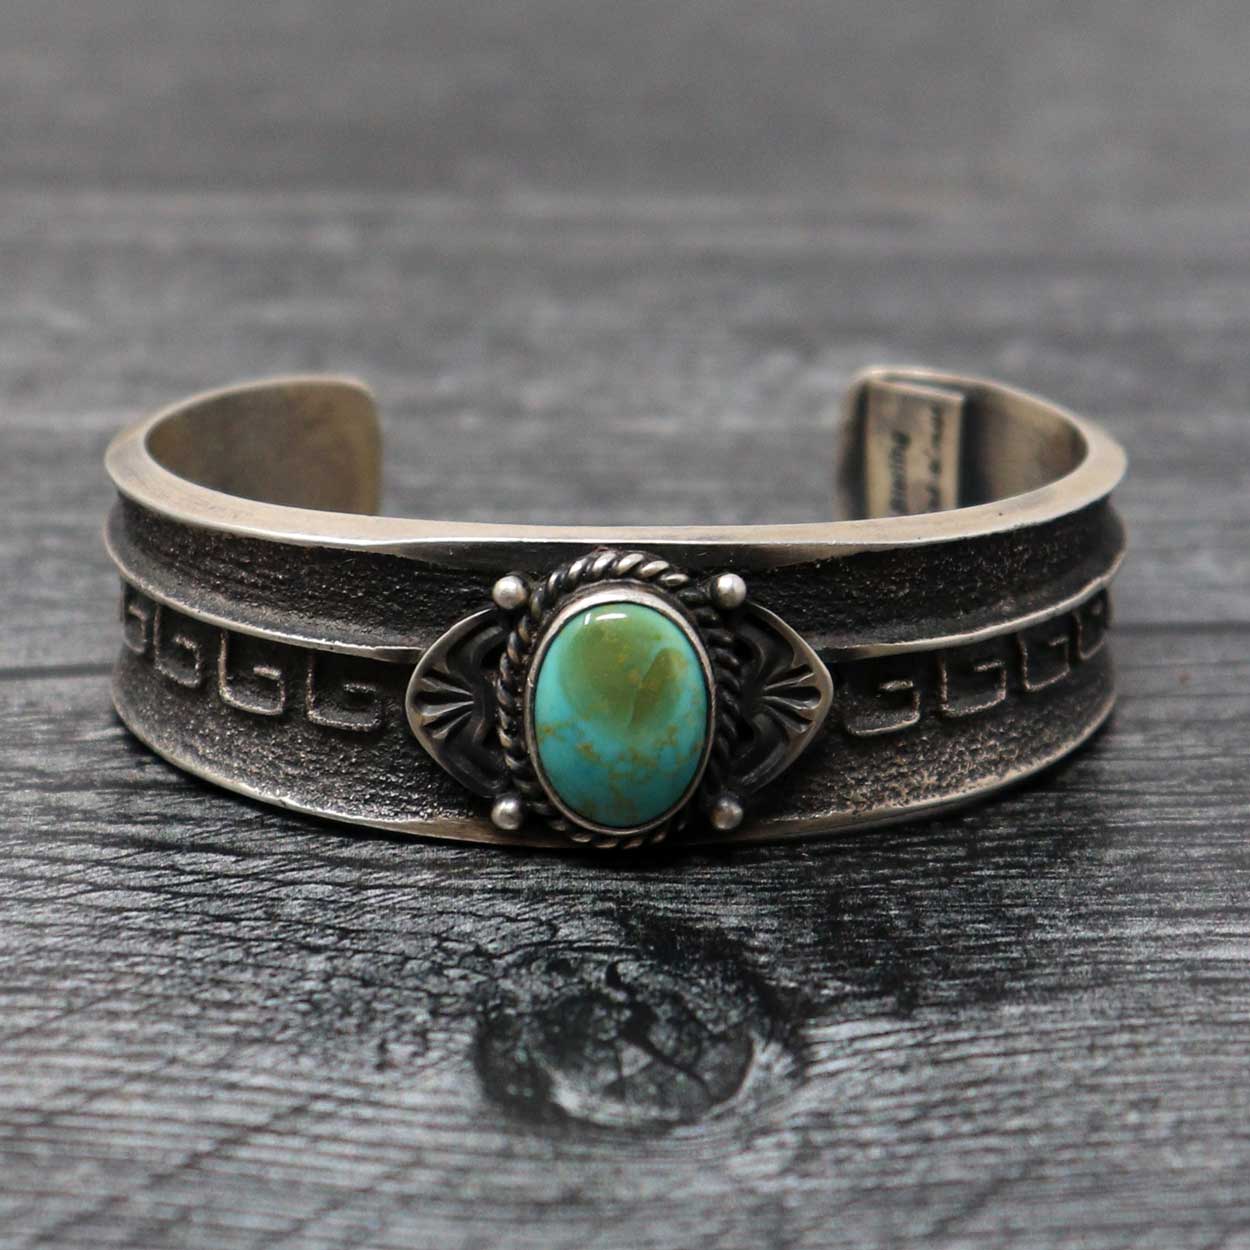 Load image into Gallery viewer, Tufa Cast Bracelet With Royston Turquoise Setting
